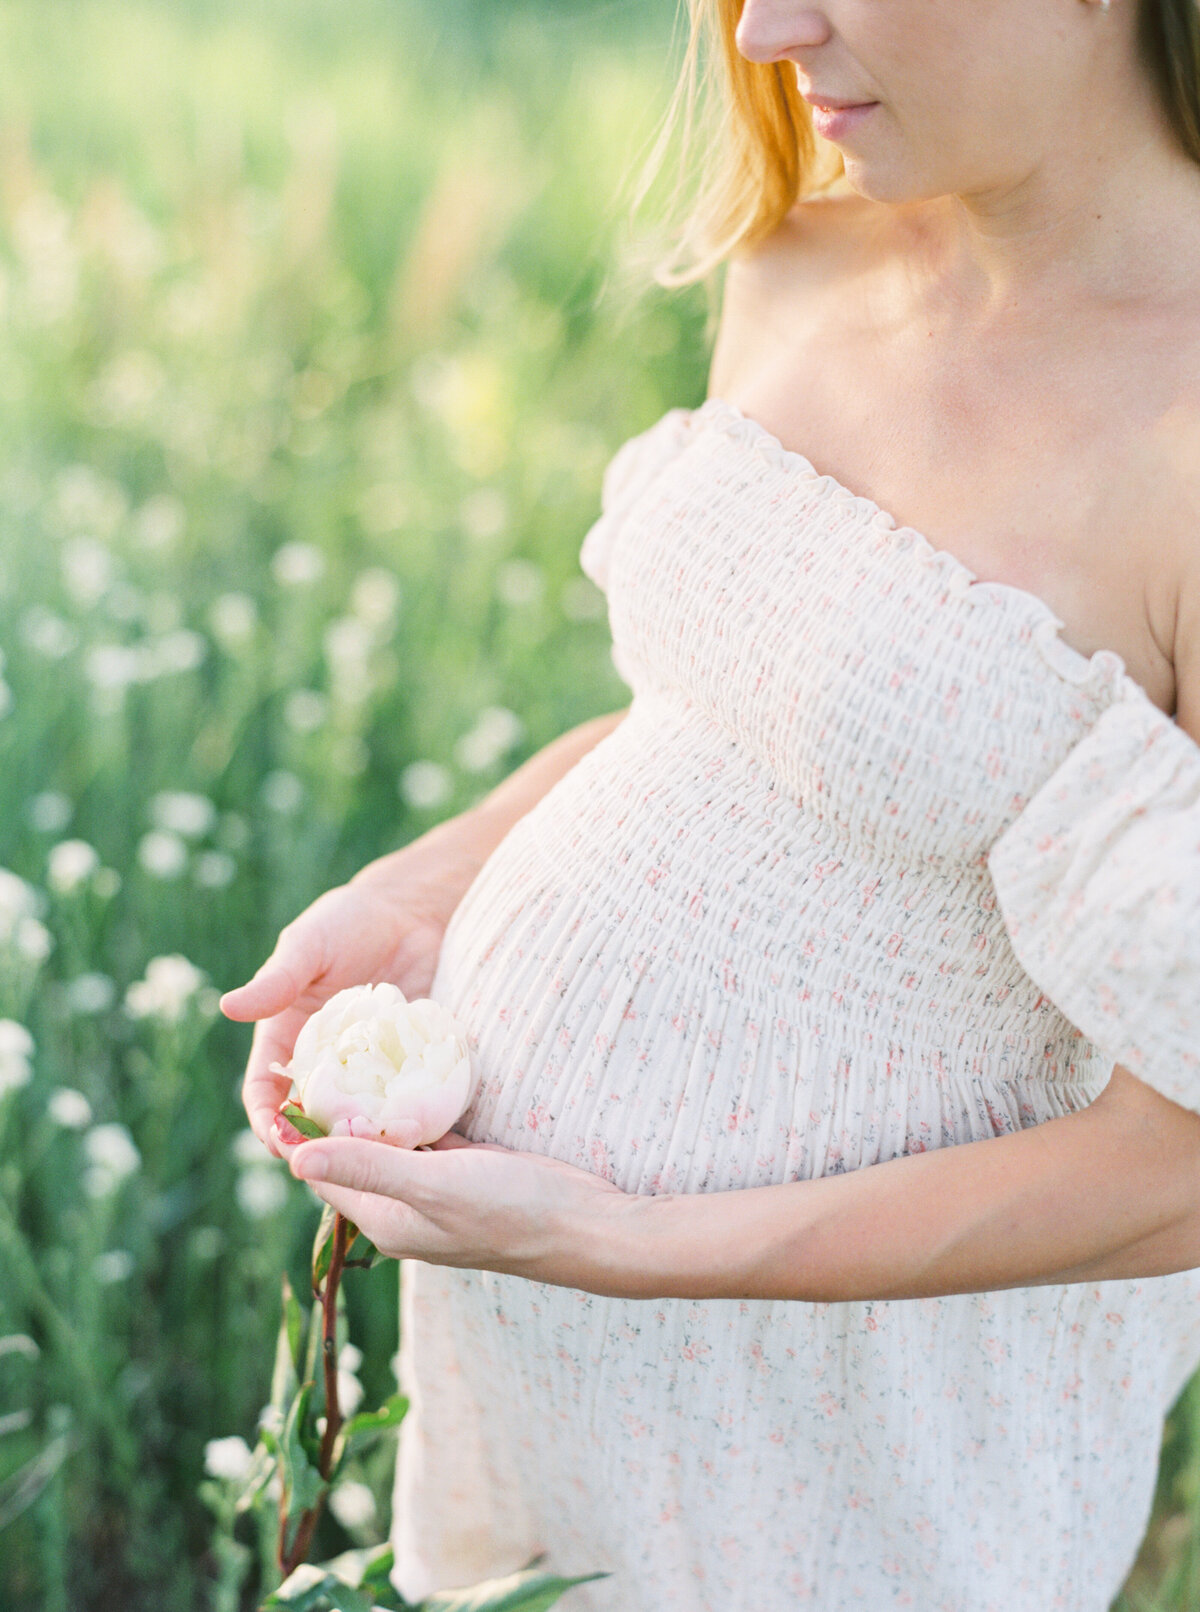 Maternity Devner Photographer Featuring  client standing in field holding flower.